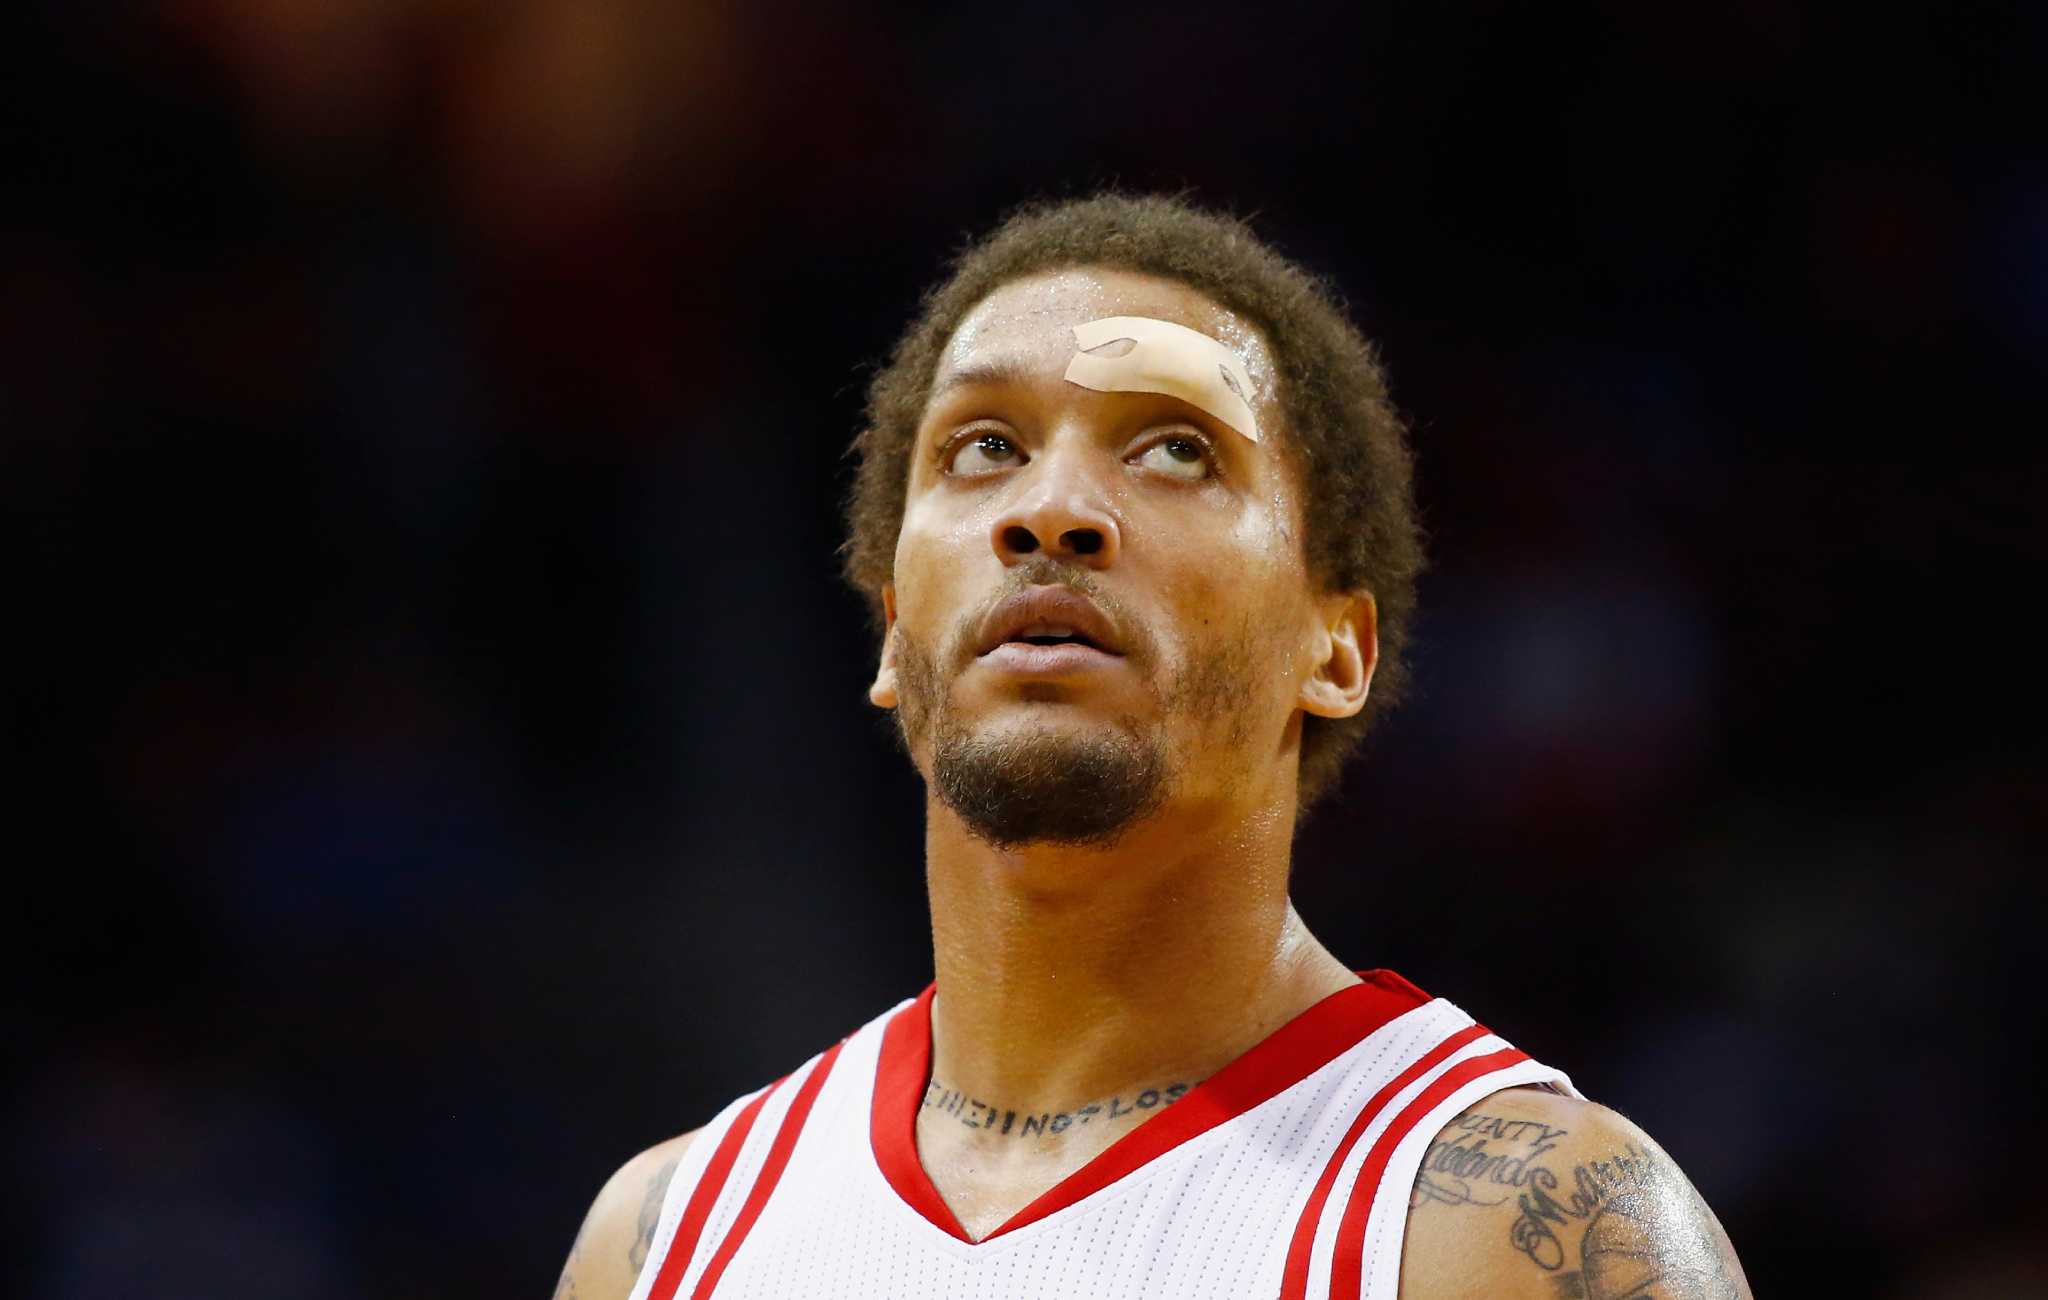 Rockets say Michael Beasley's focus is on career, family